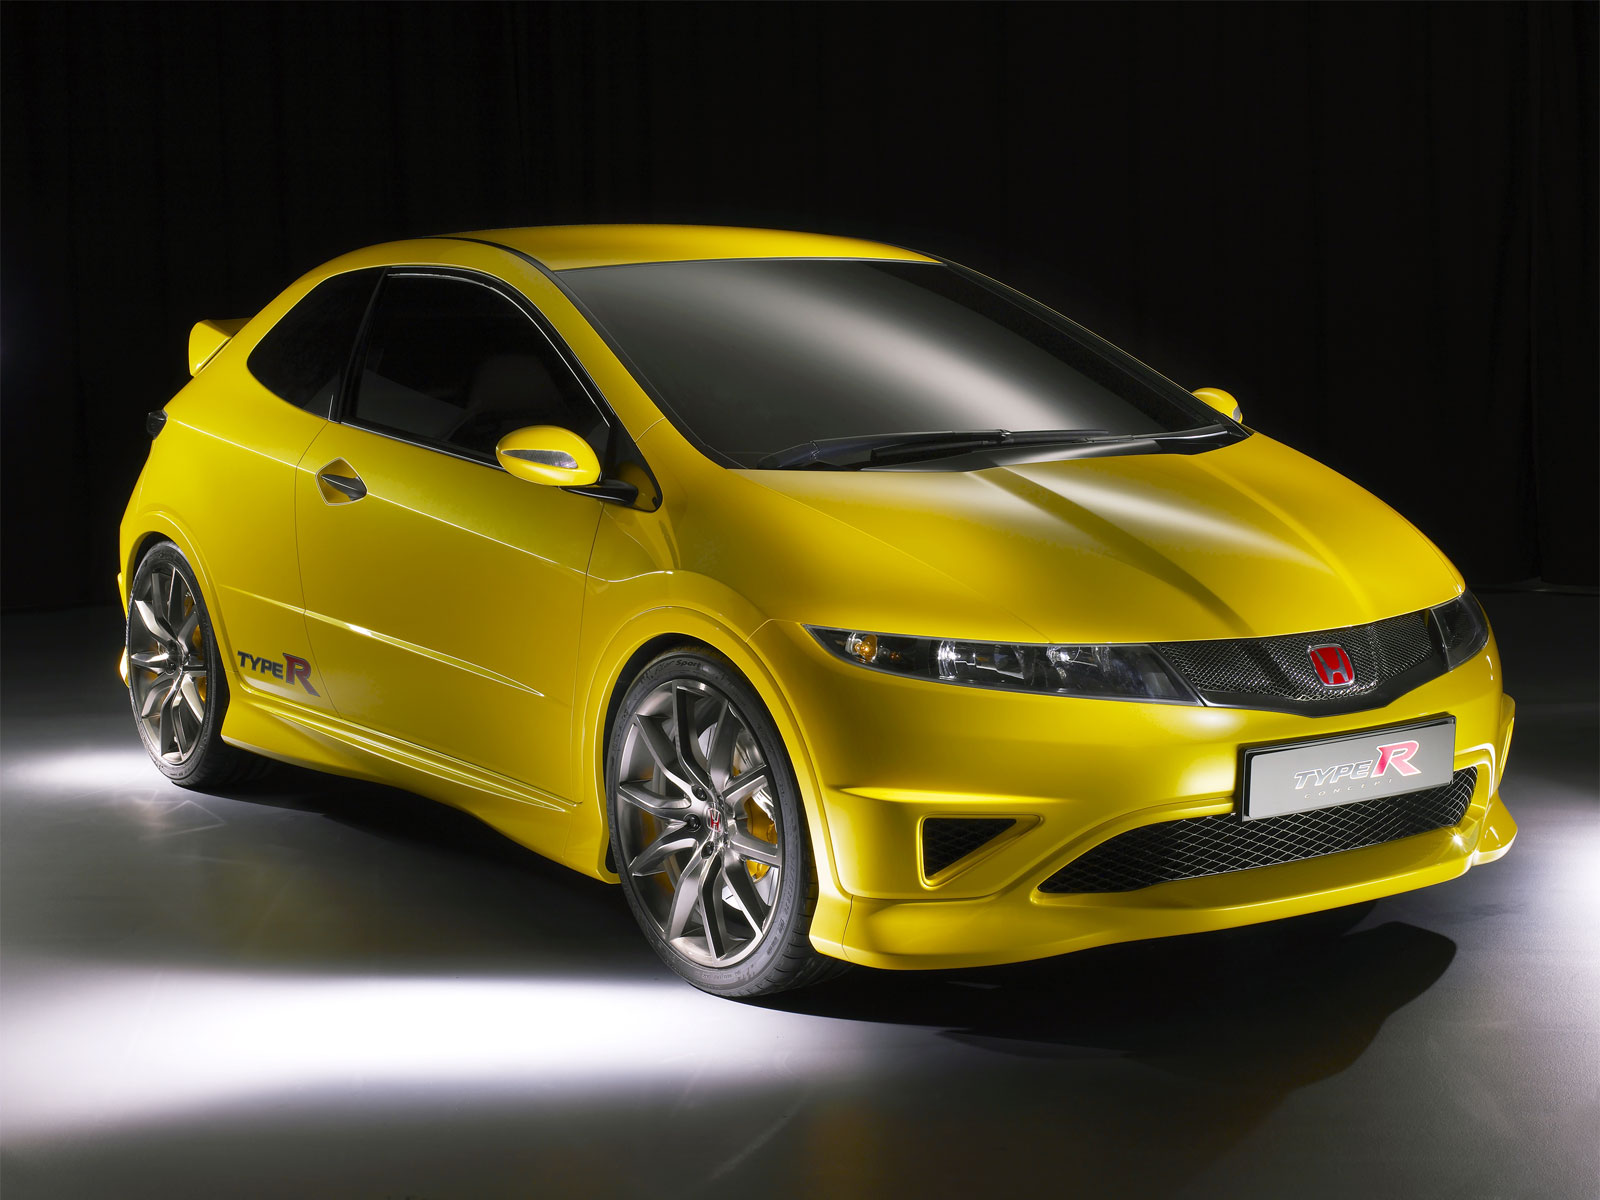 Free Download Yellow Honda Type R Wallpaper Images 449 Wallpaper High Resolution 1600x10 For Your Desktop Mobile Tablet Explore 43 Genre Of The Yellow Wallpaper The Yellow Wallpaper Shmoop